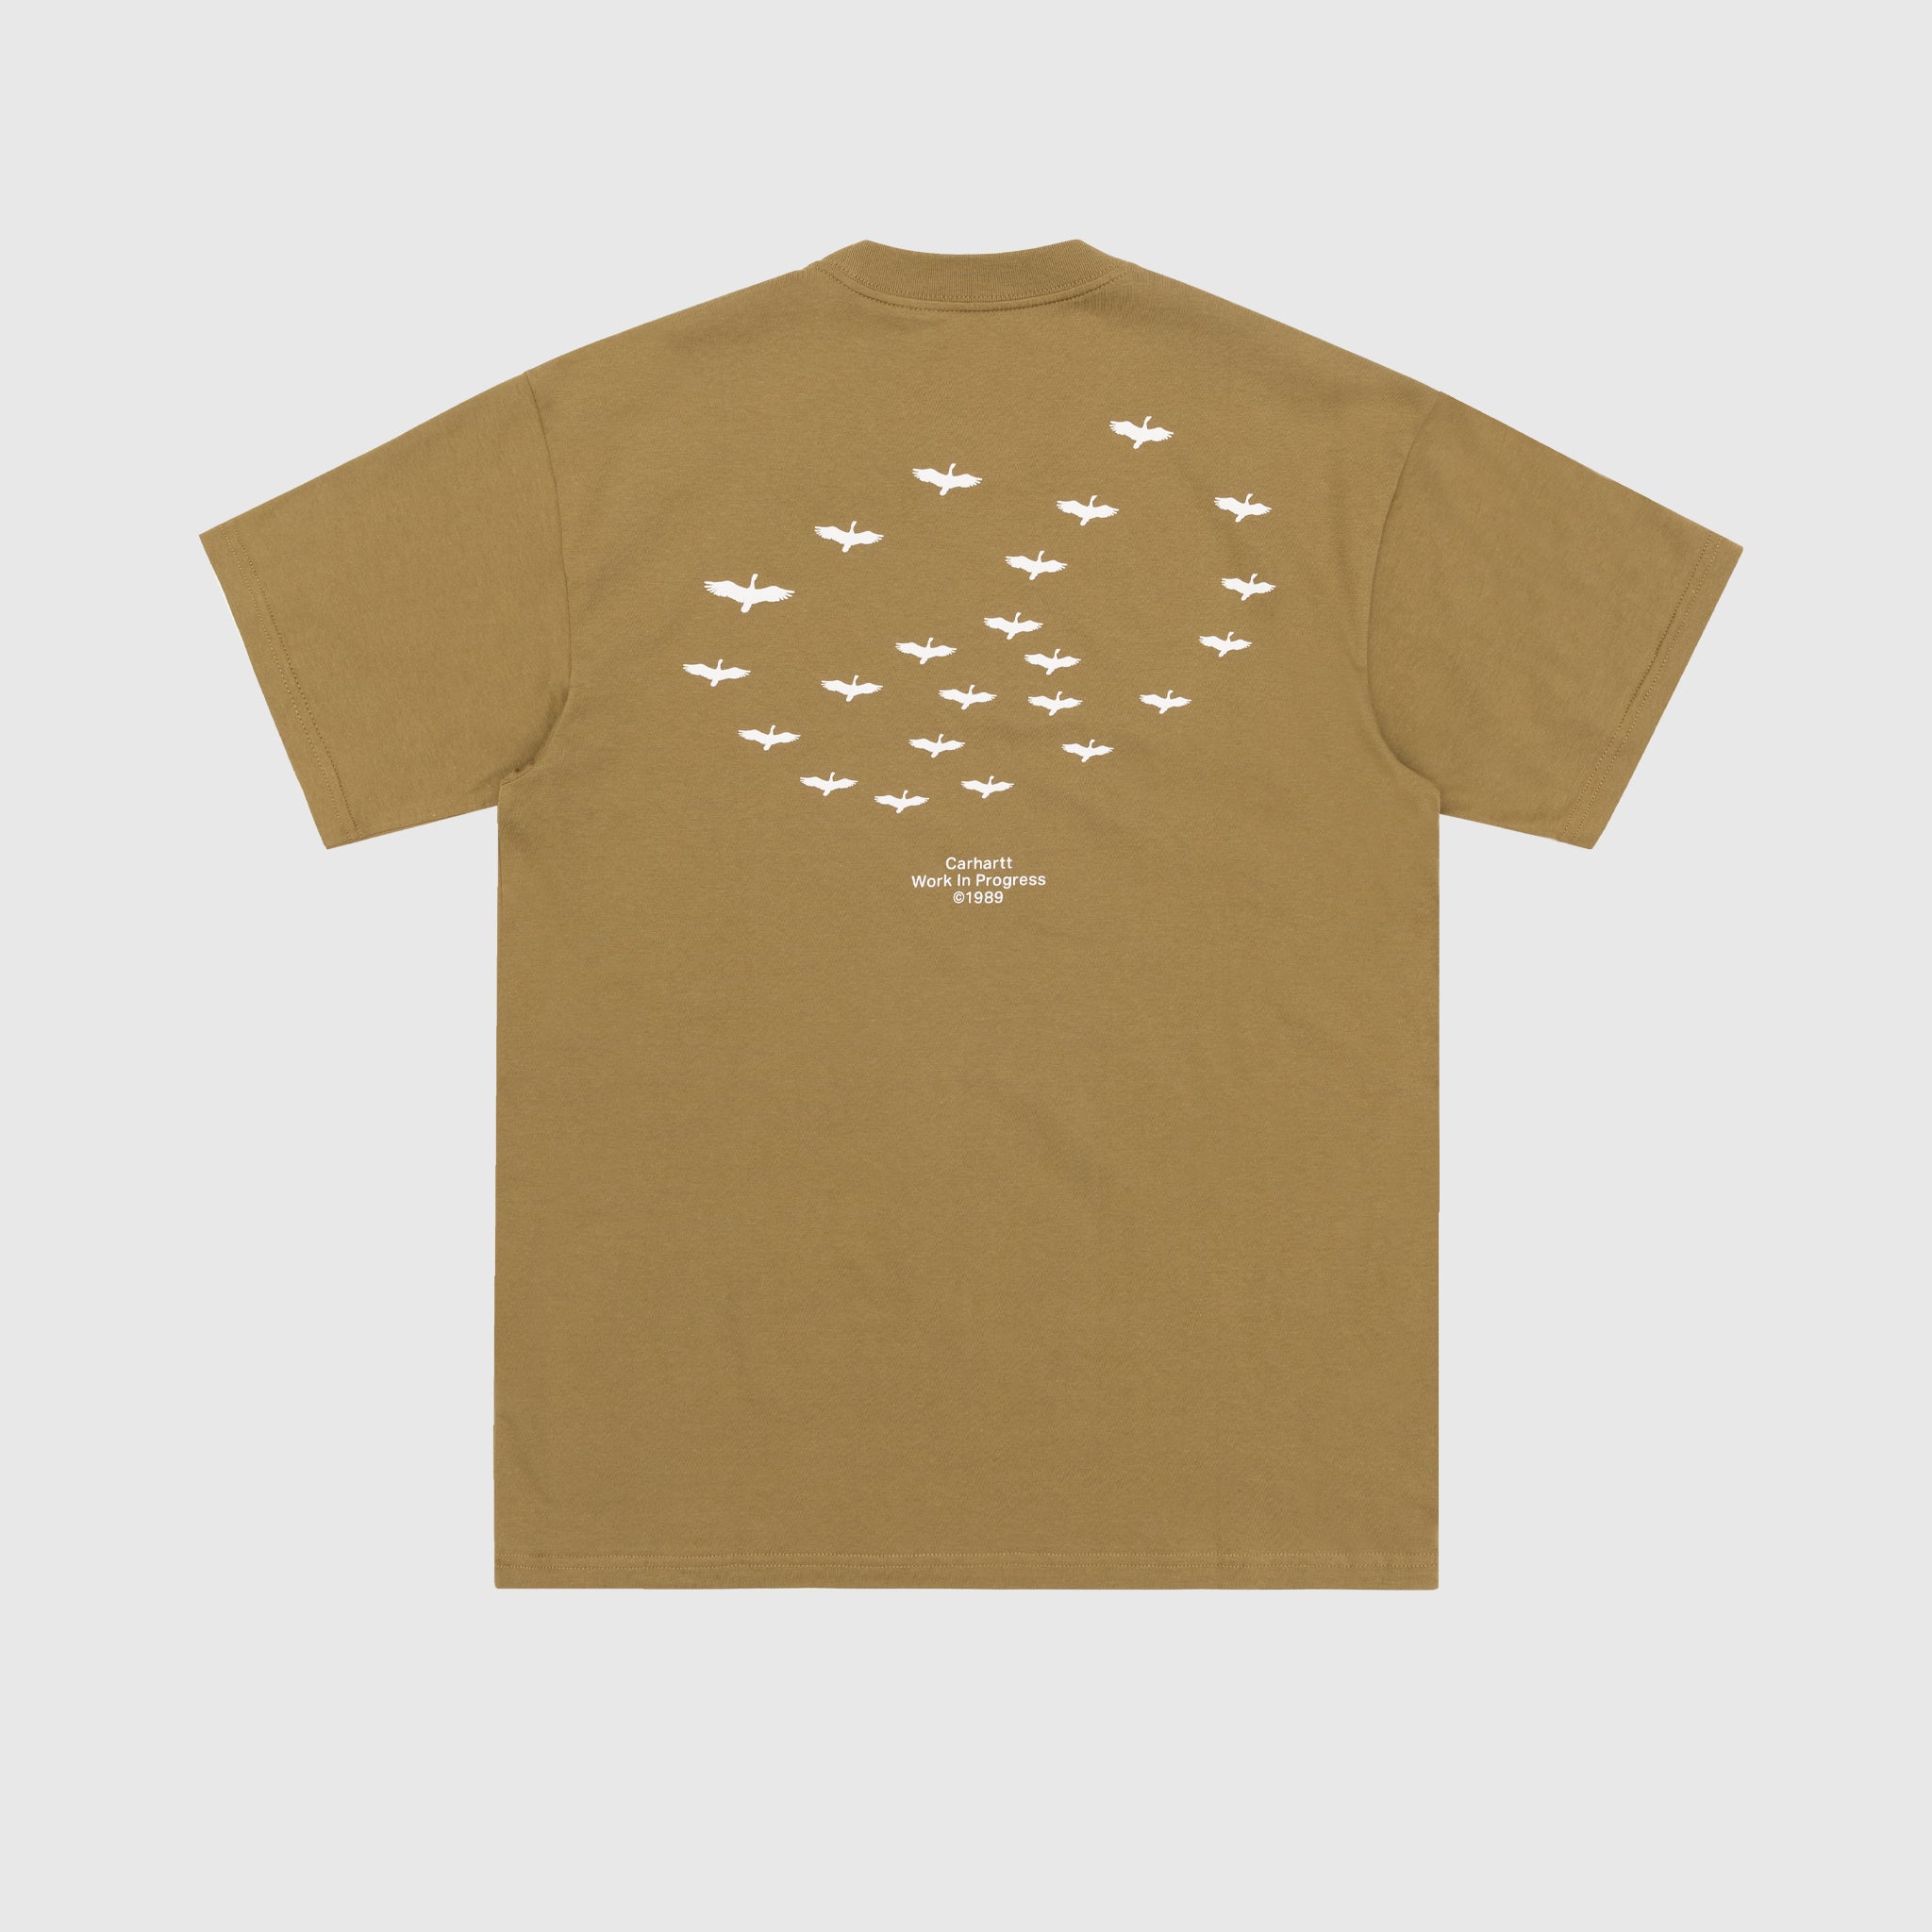 FORMATION S/S T-SHIRT